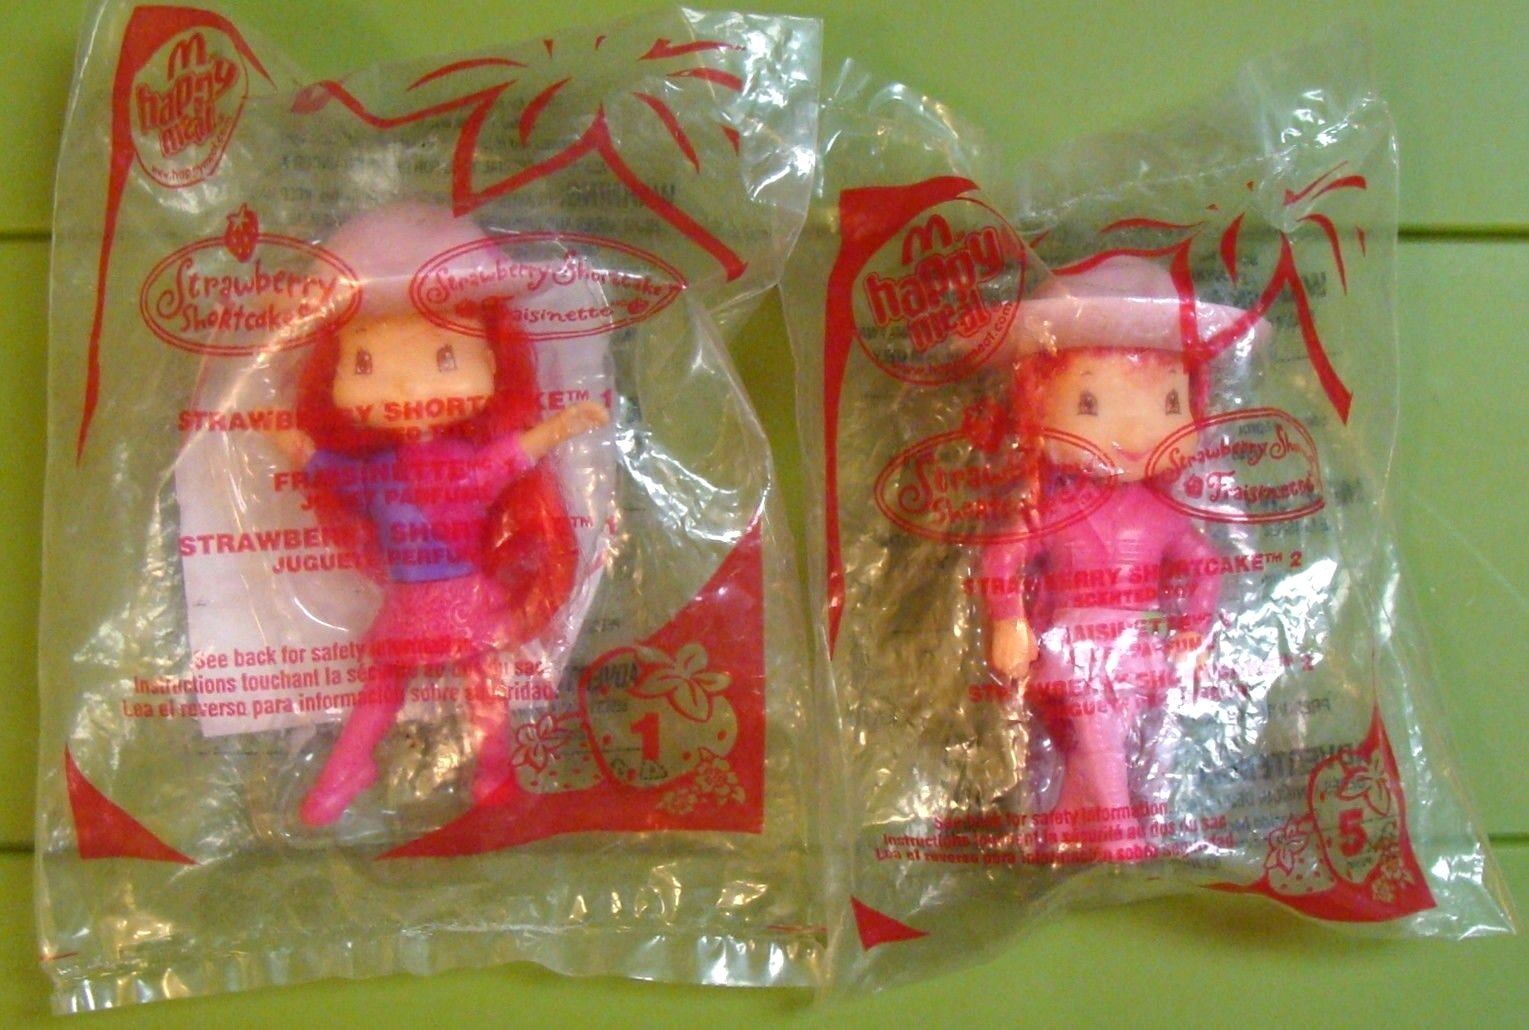 Details about   2007 Strawberry Shortcake McDonalds Happy Meal Toy Scented Strawberry #1 